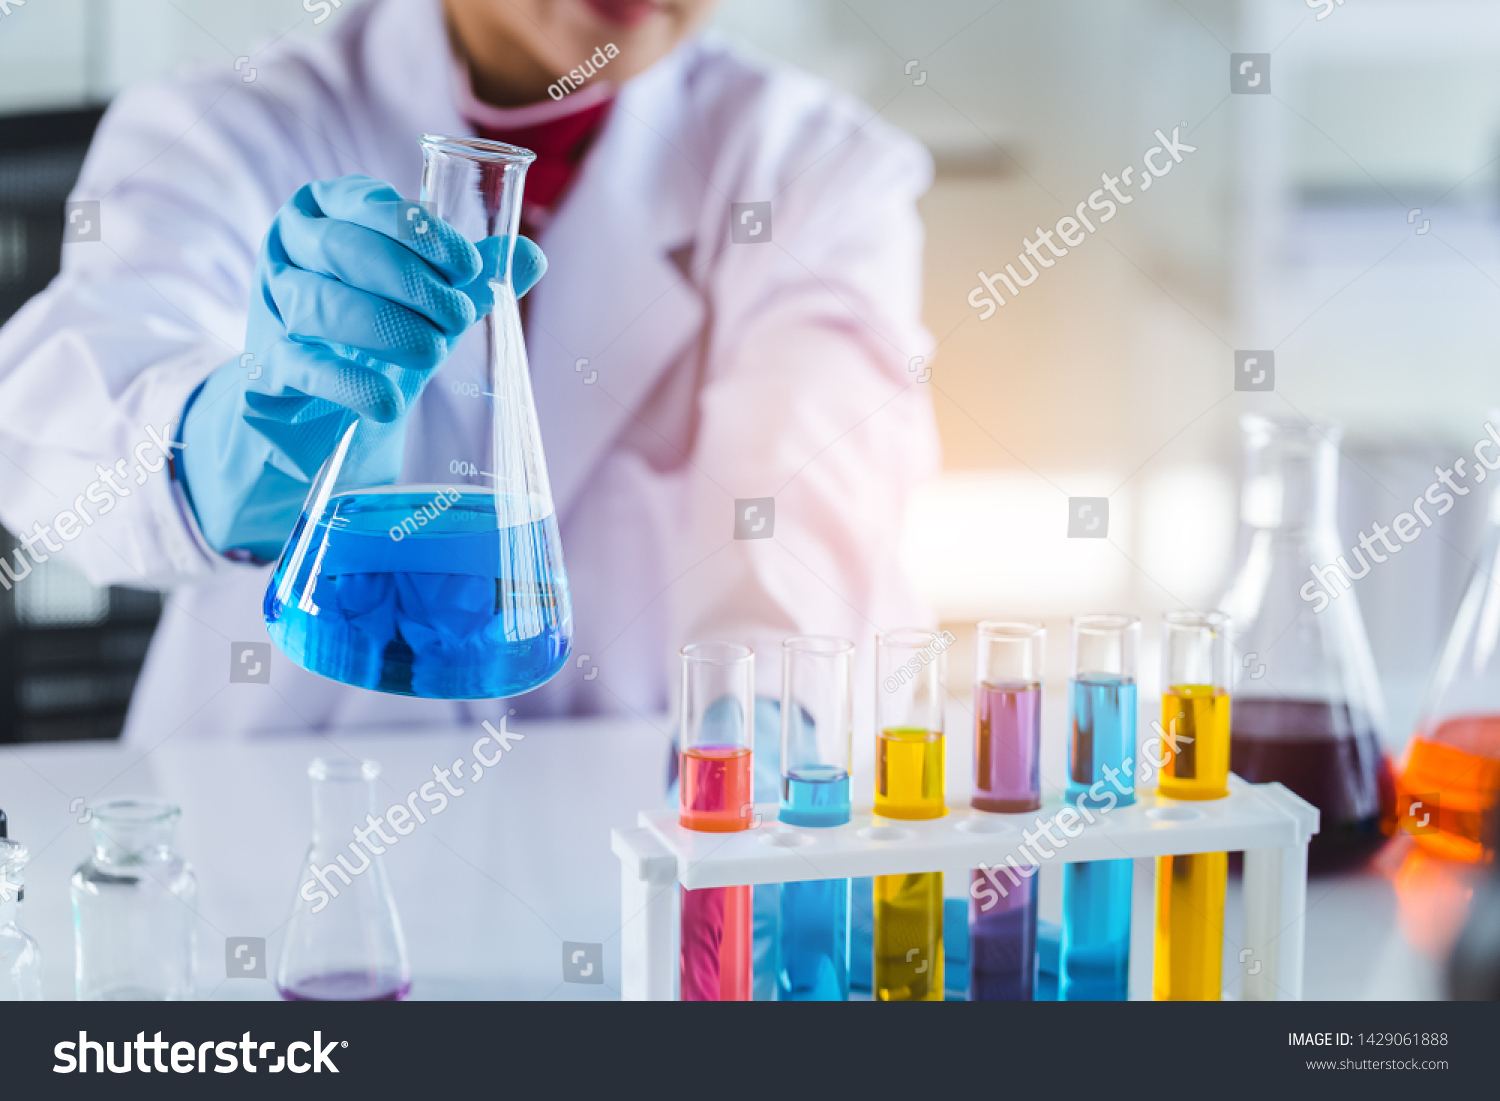 laboratory research and development concept with scientist and lab glassware #1429061888